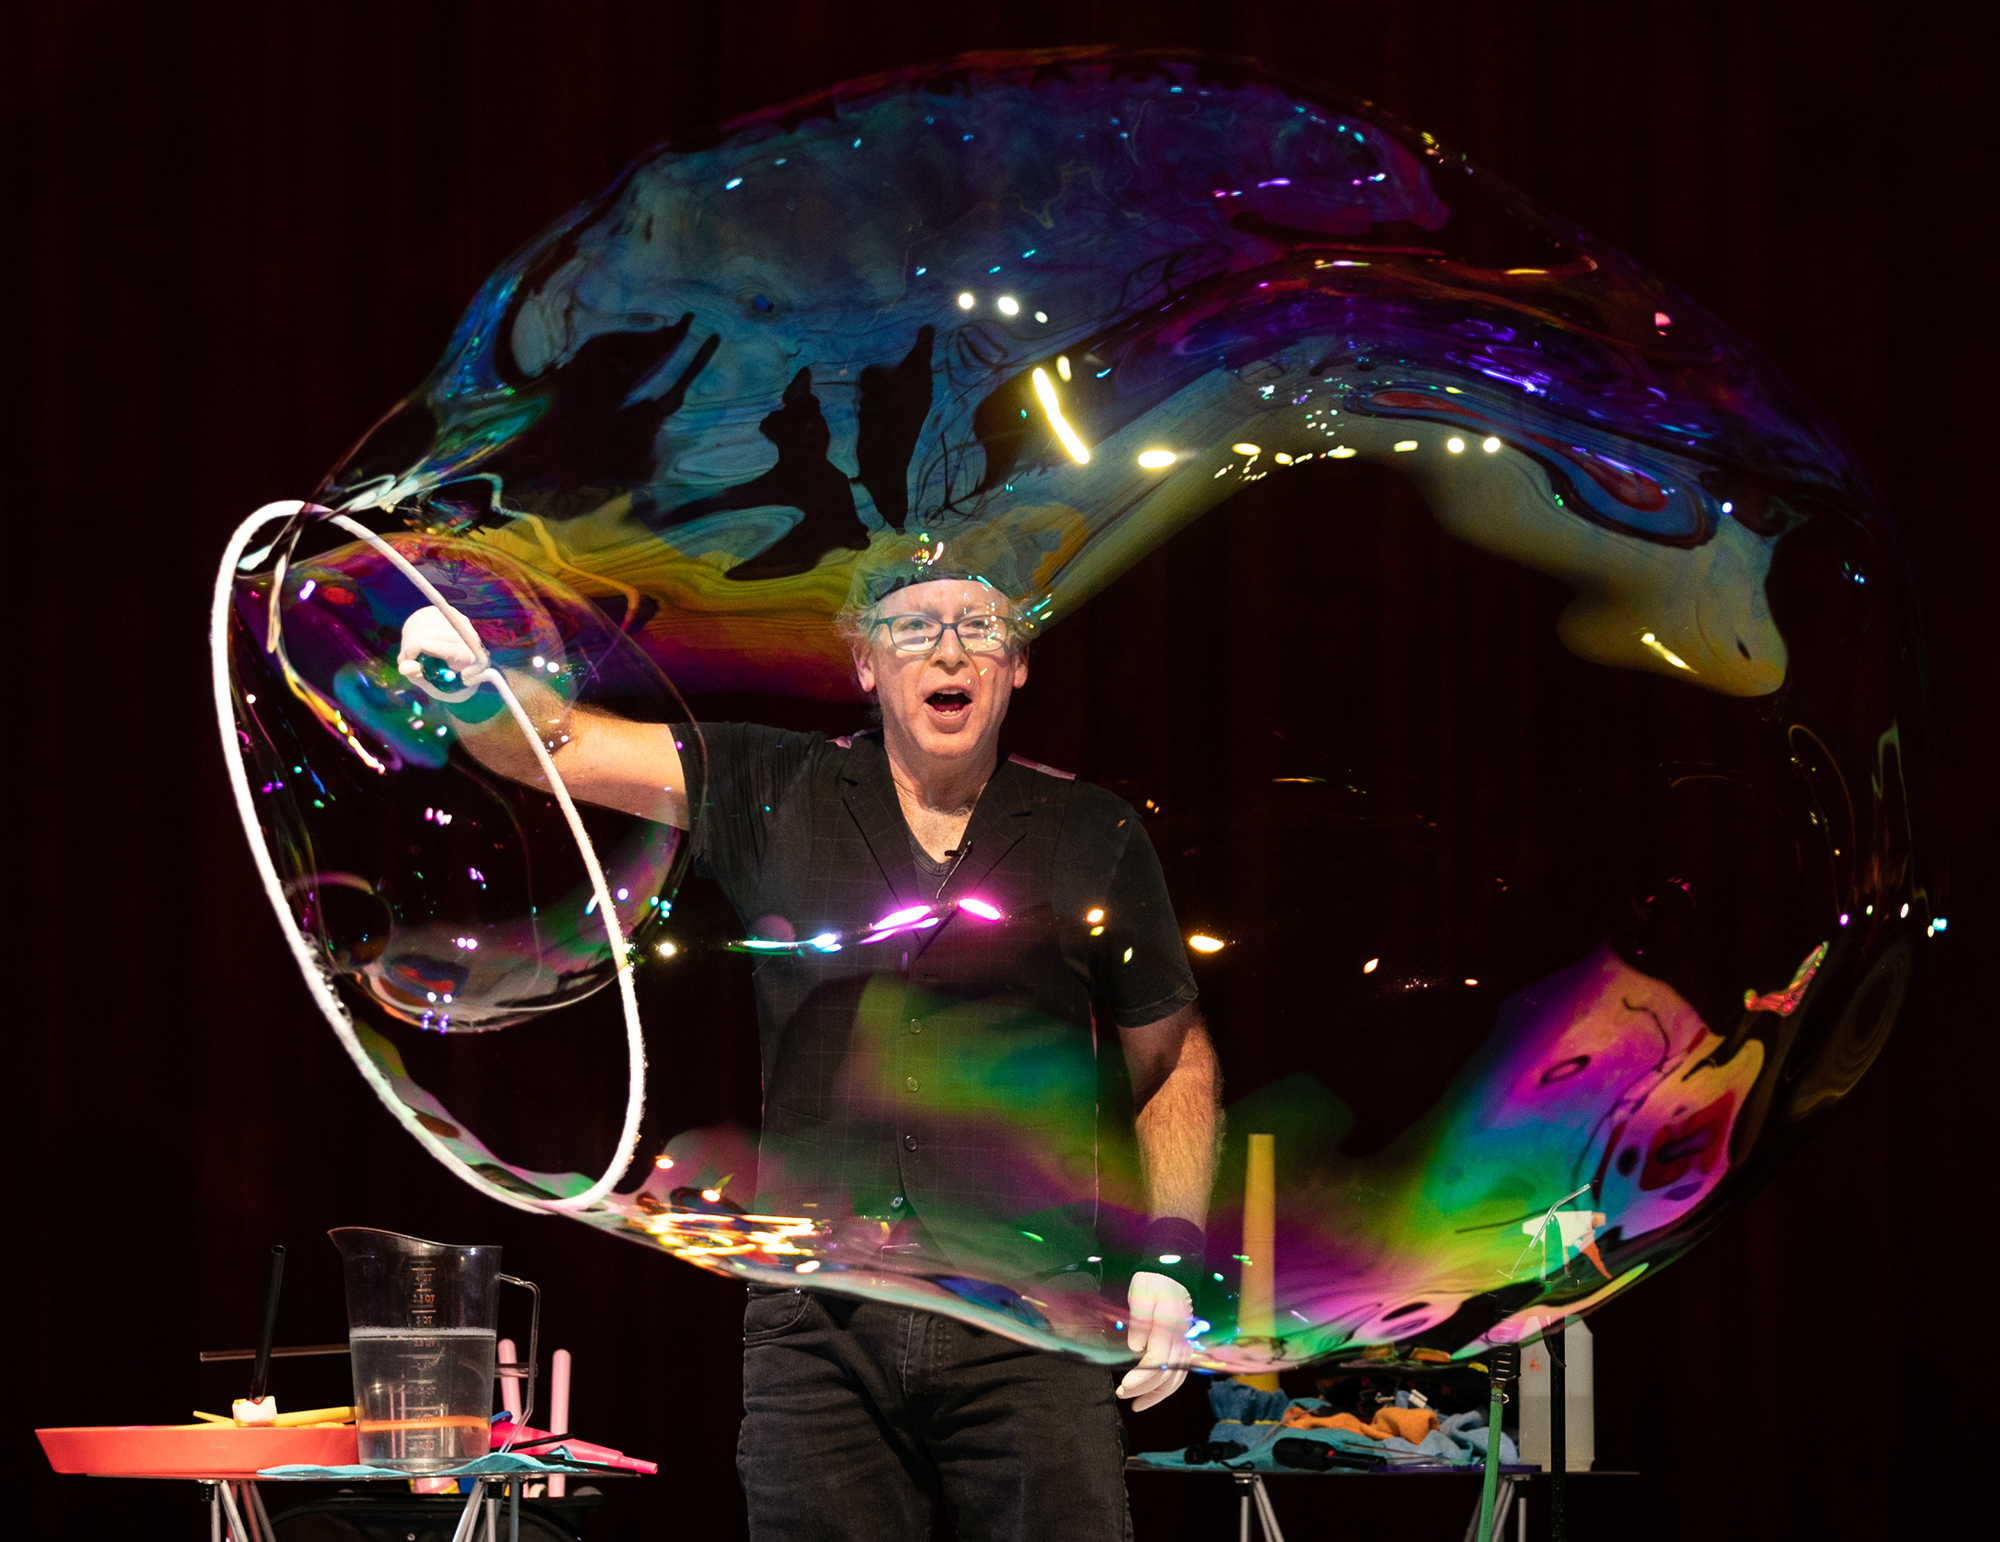 Louis Pearl, who's stage name is The Amazing Bubble Man, performs for the audience as part of Columbia Play Project's Wiggles and Giggles series at Kiggins Theatre on Saturday. The next performance in the Wiggles and Giggles series will feature Hearts and Hands Drumming on Feb. 12 at Kiggins Theatre.